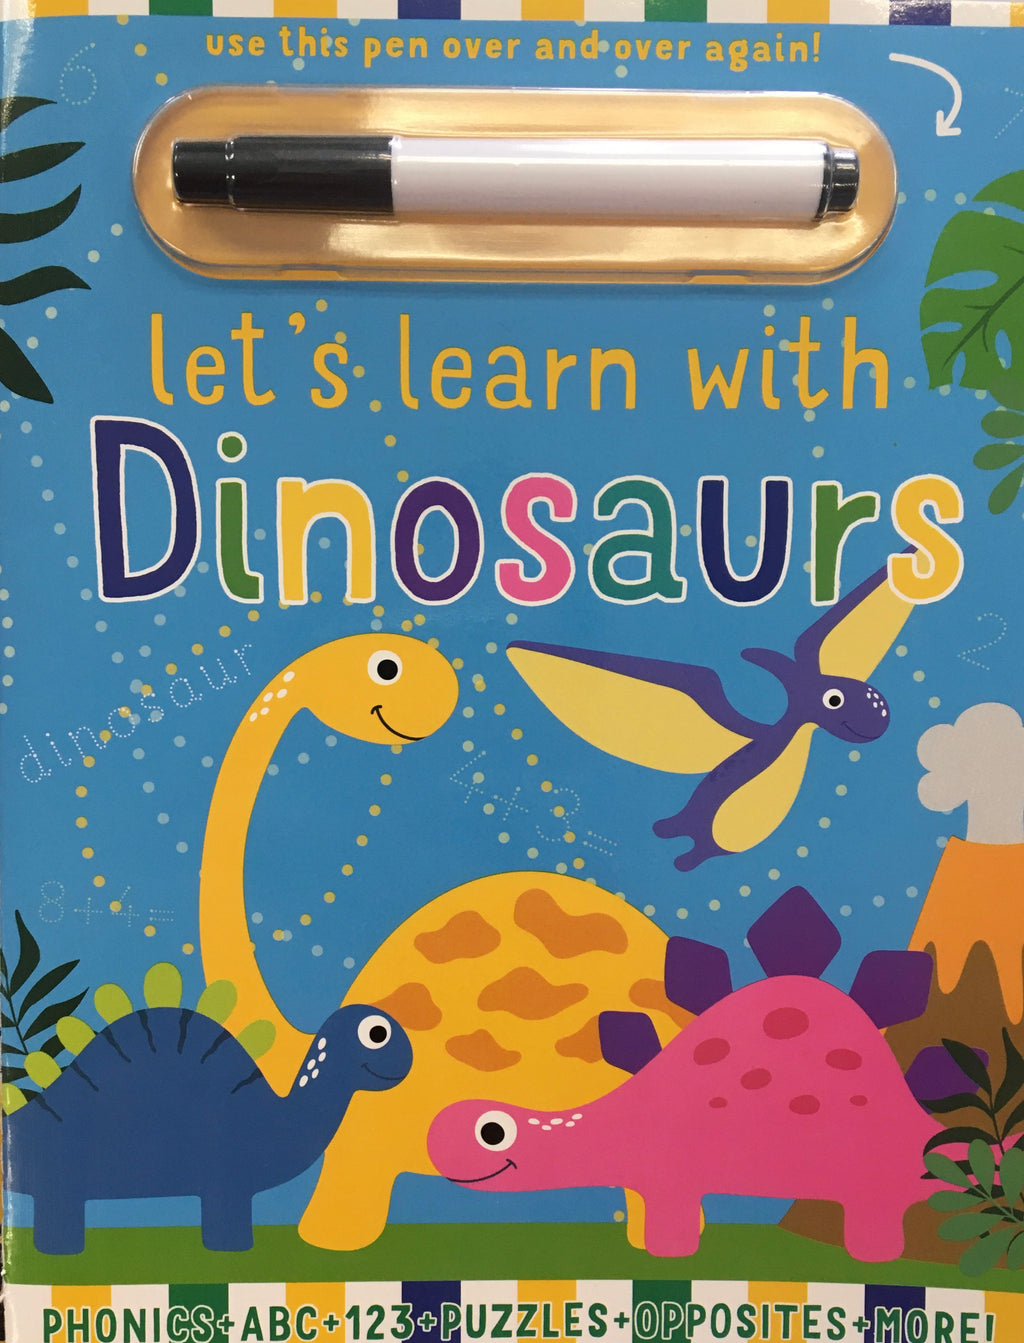 Let's learn with Dinosaurs